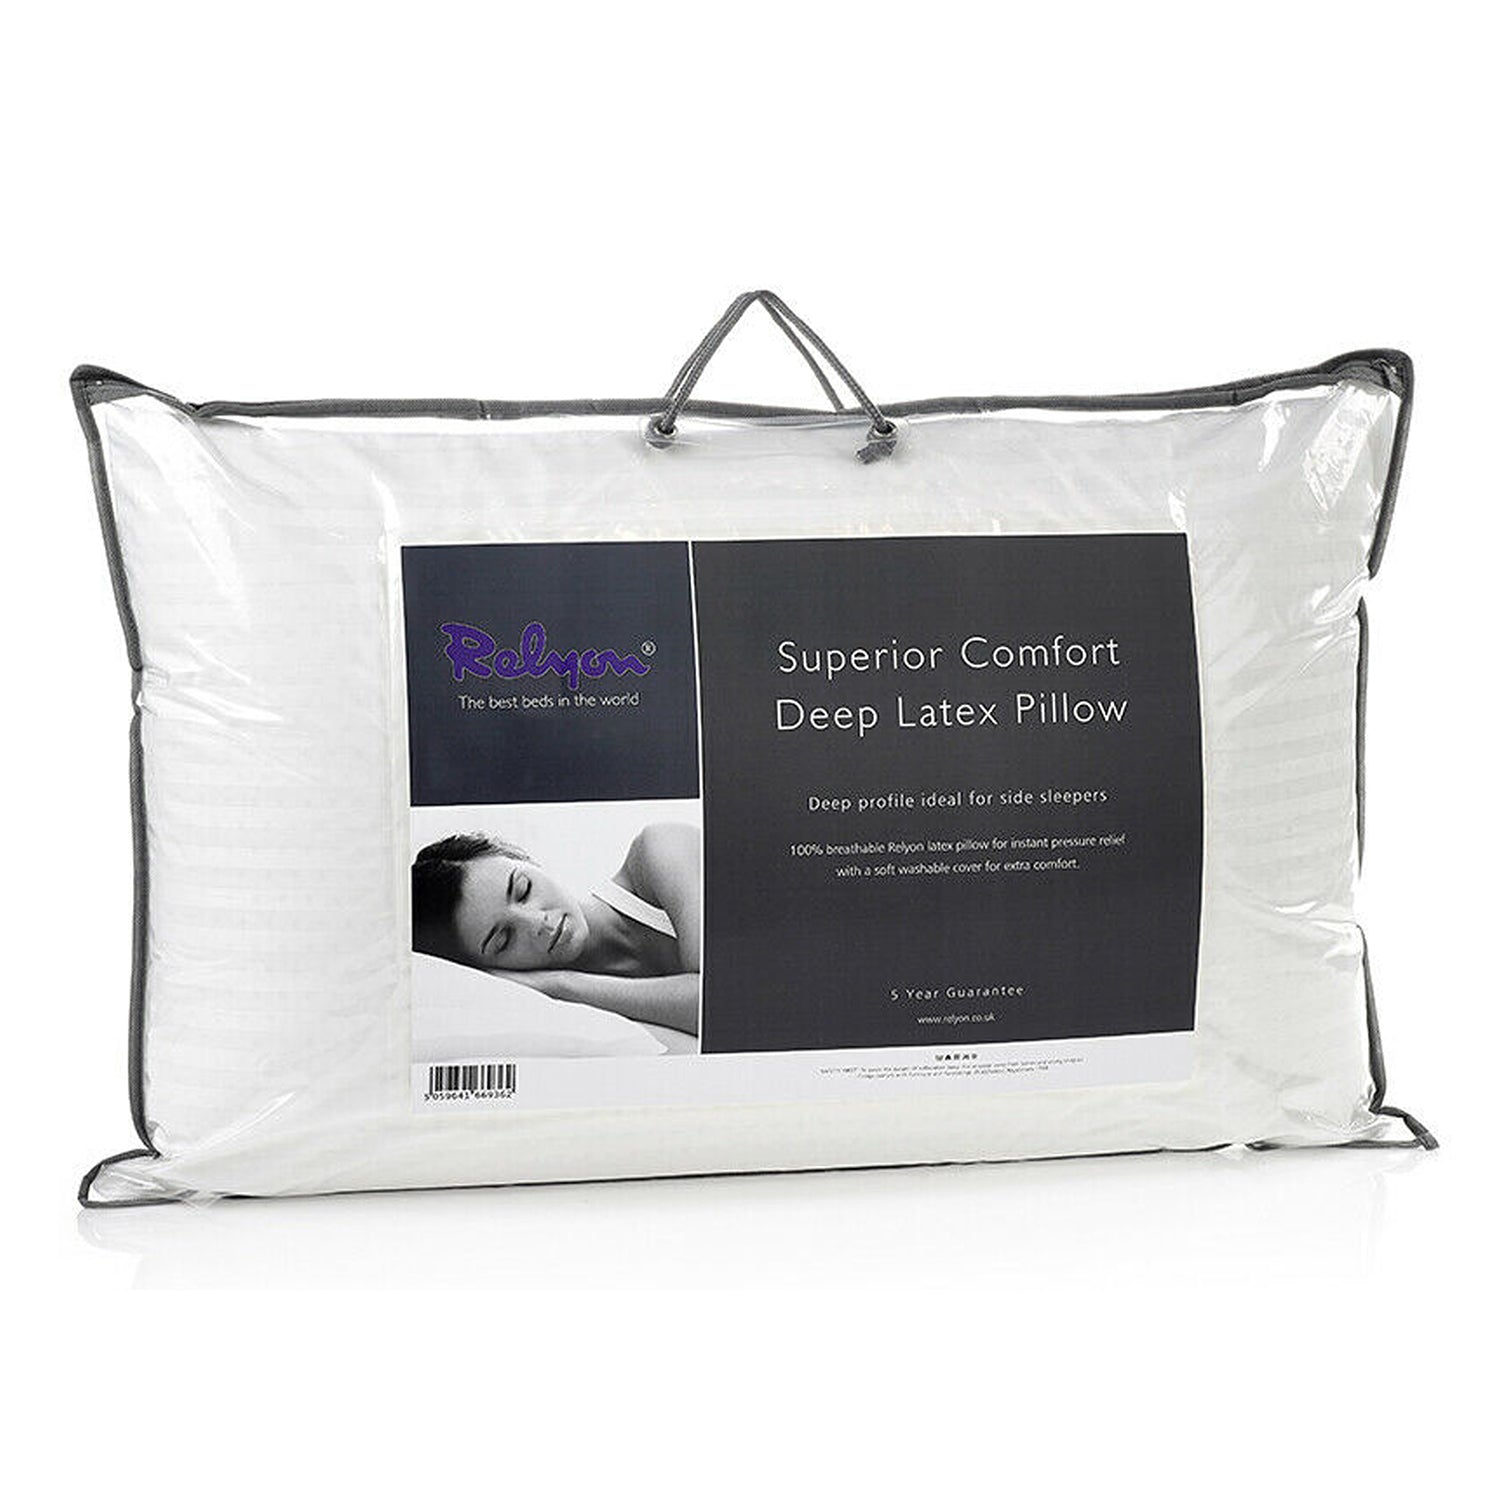 Relyon Superior Comfort Deep Latex Pillow 1 Shaws Department Stores